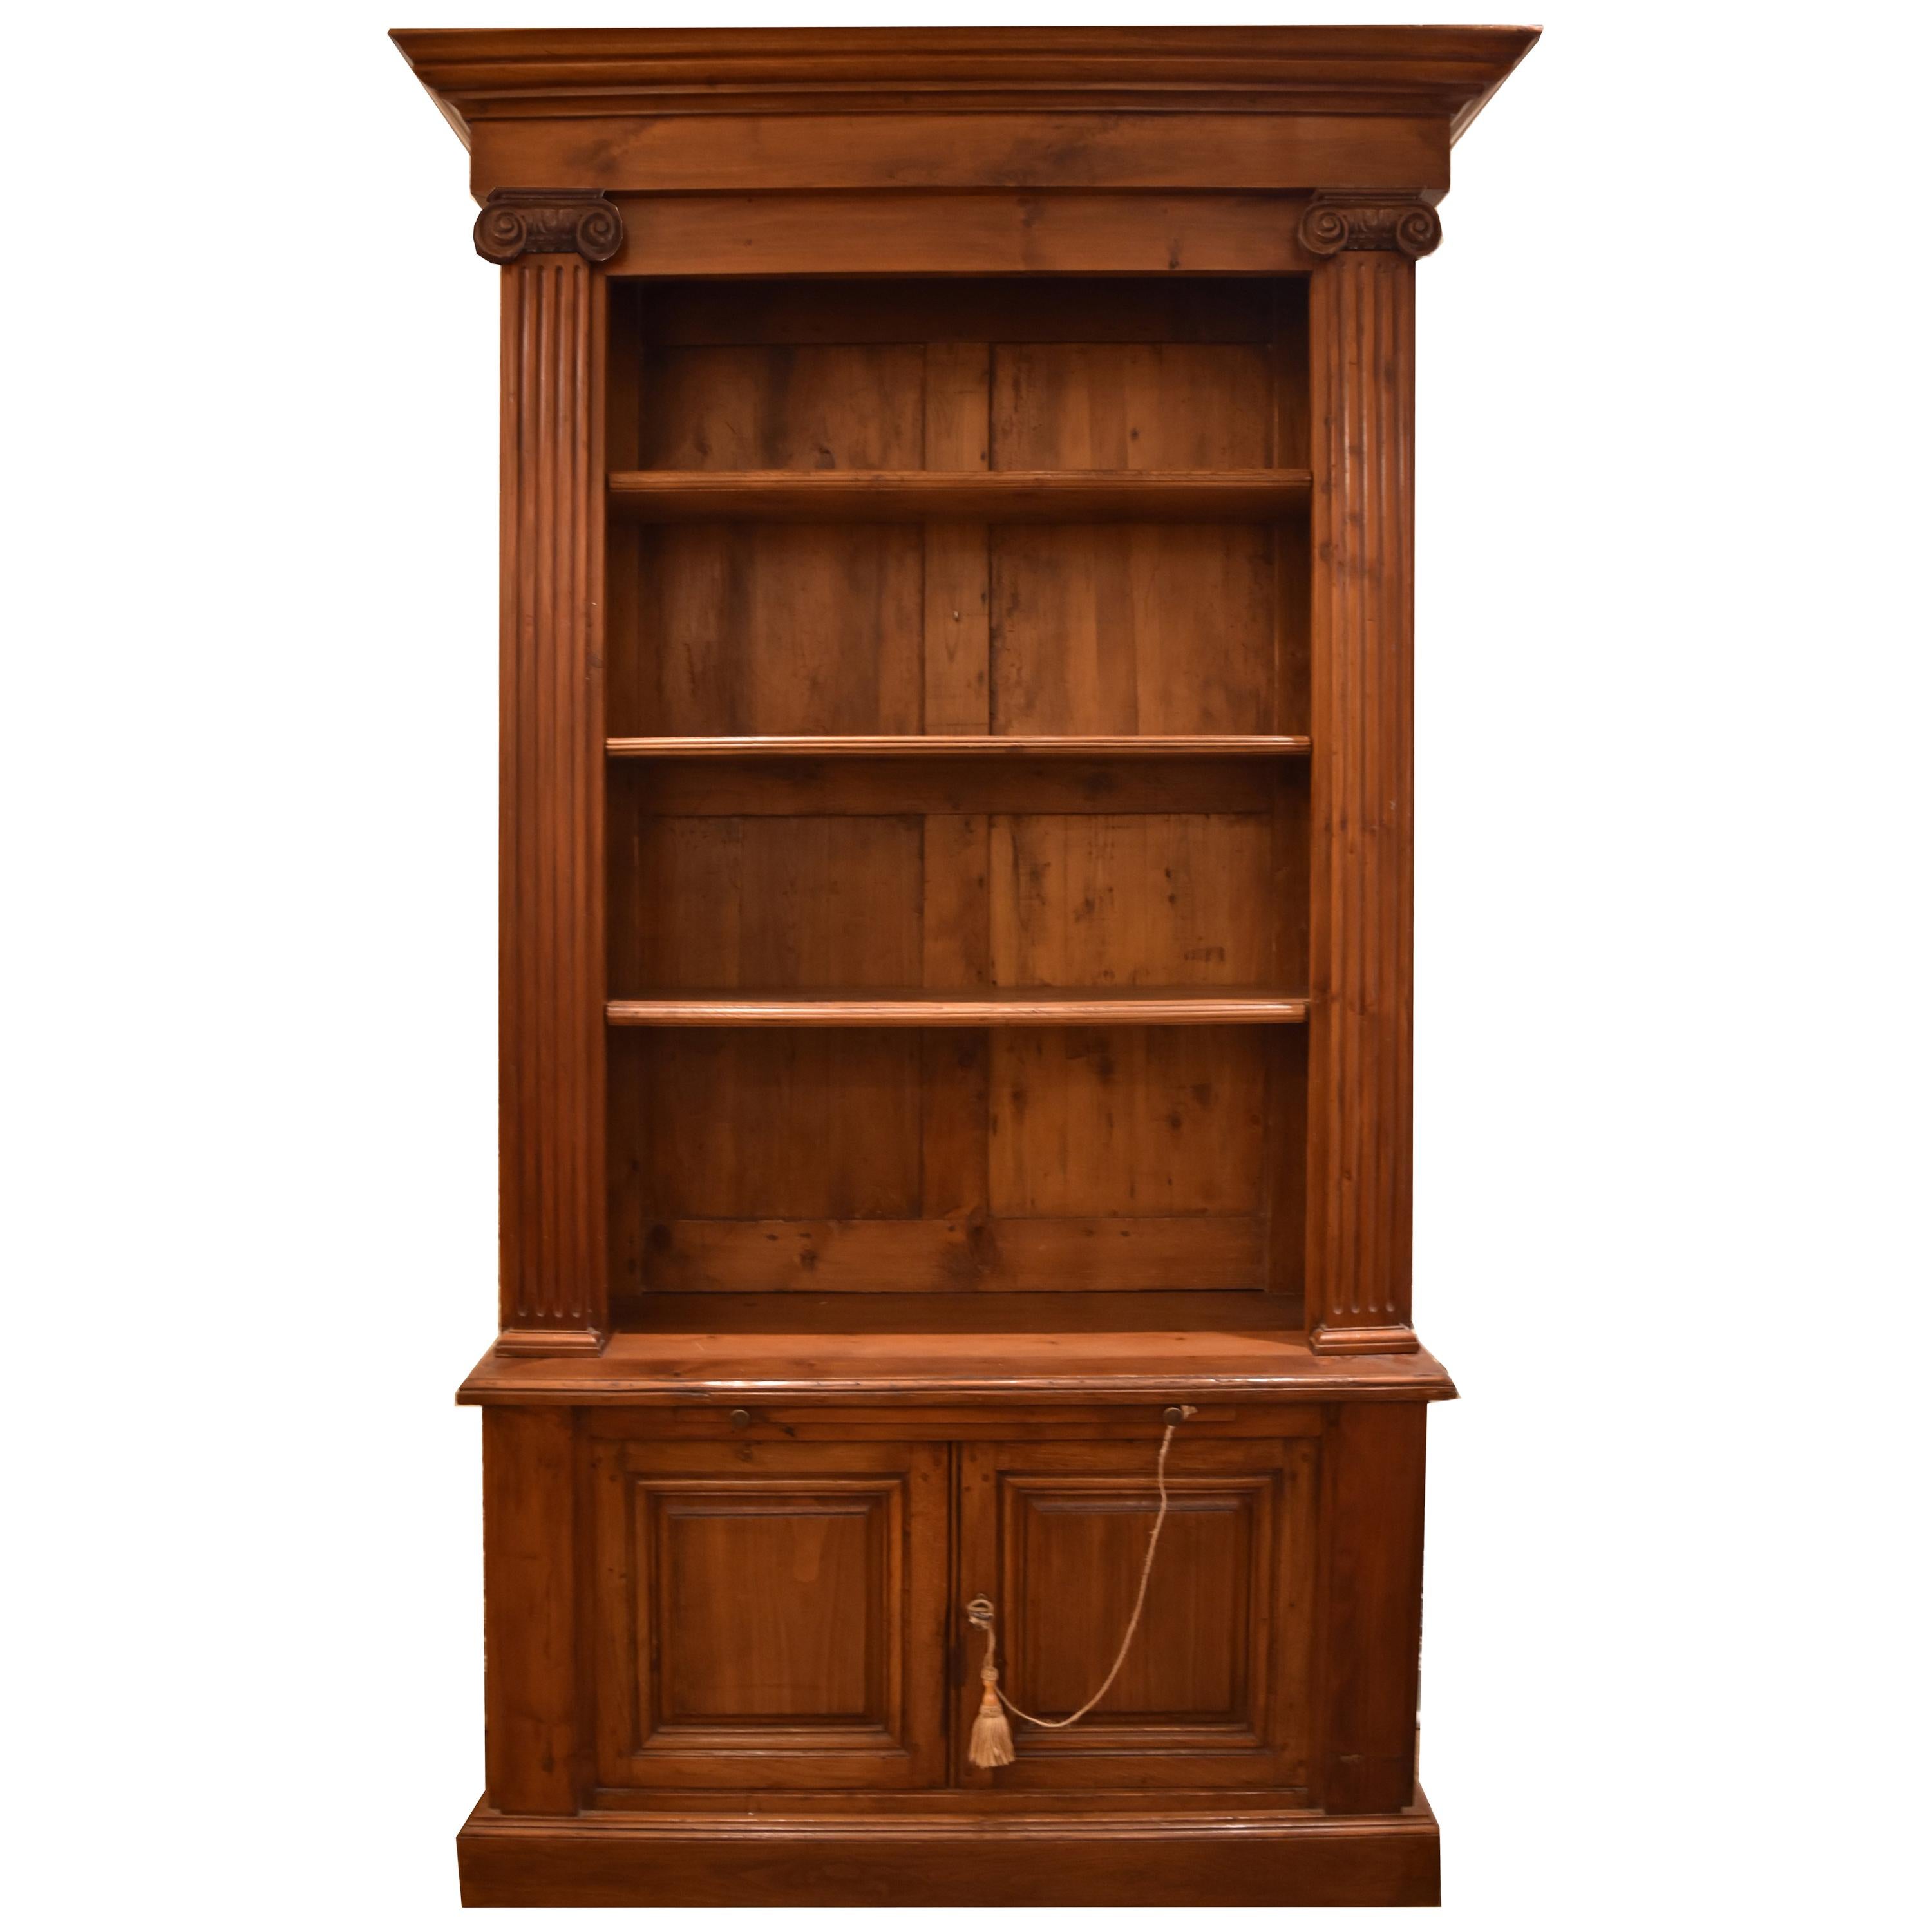 18th Century French Cherry Bibliotheque or Bookcase For Sale